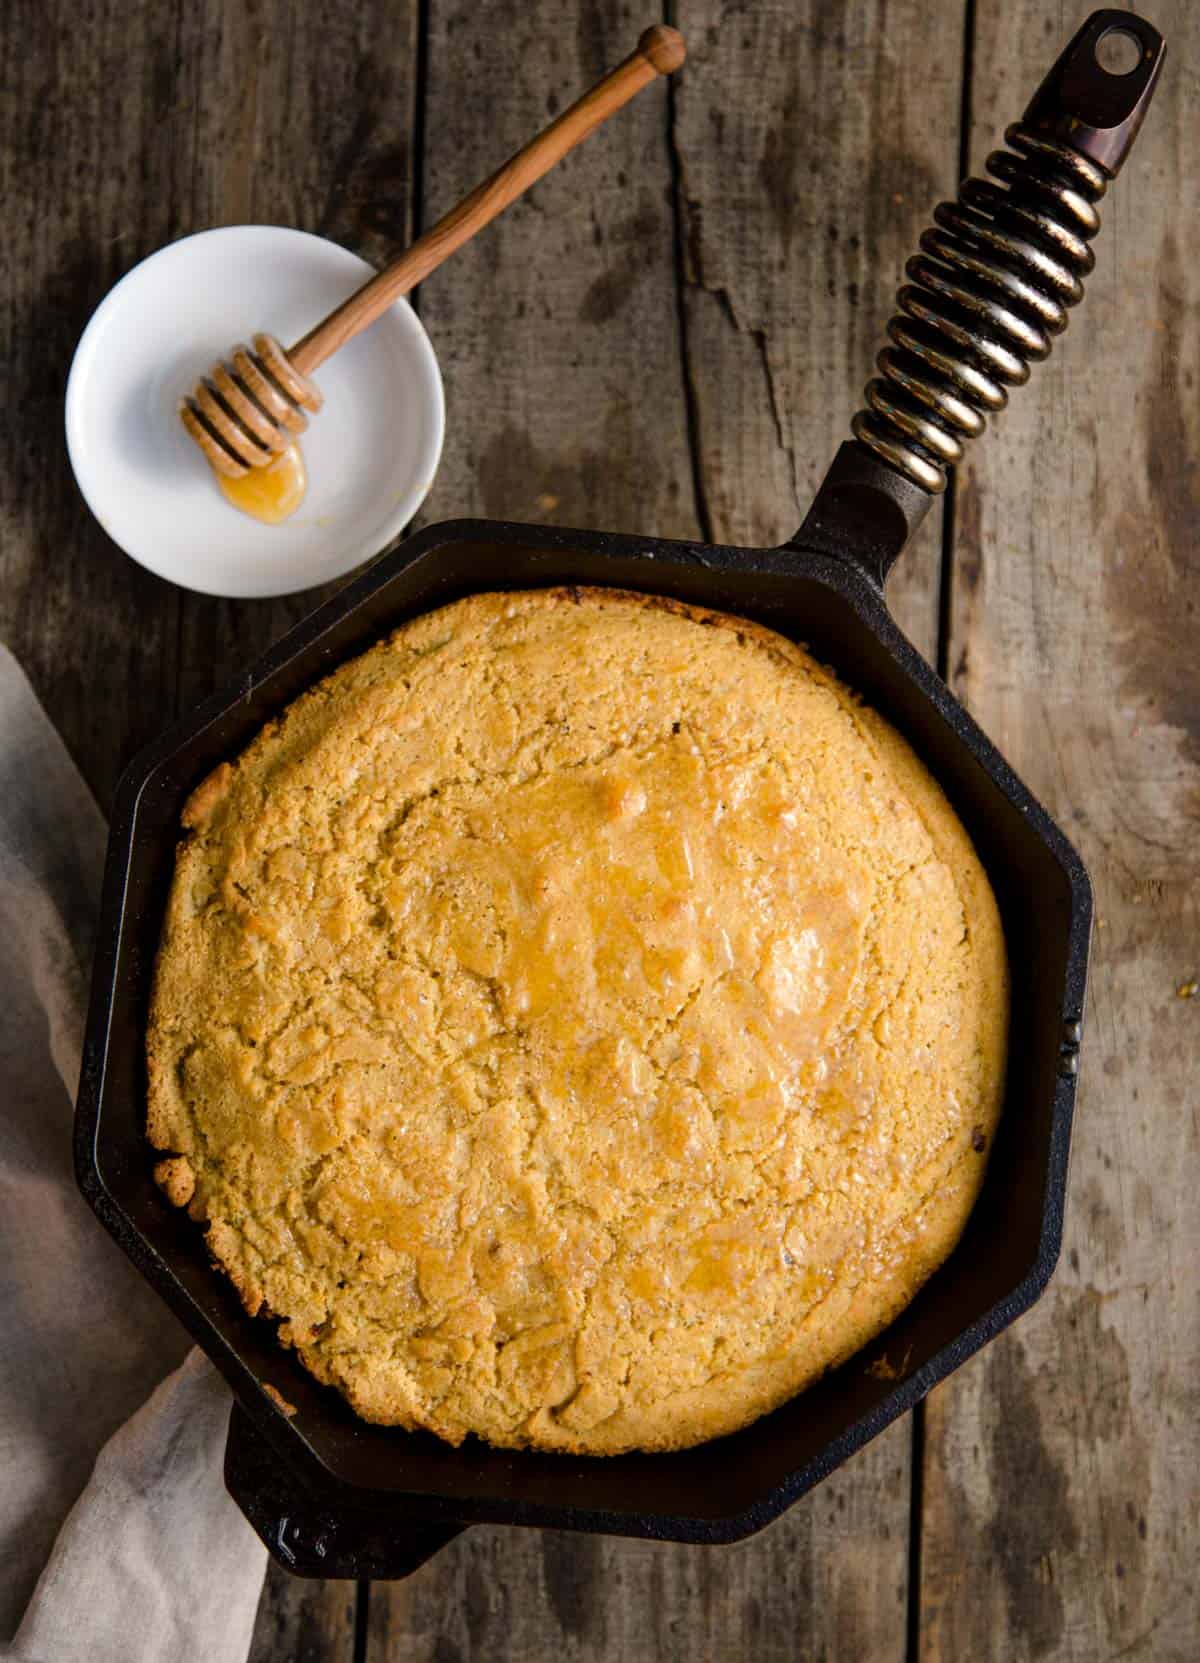 Skillet Cornbread with a drizzle of smoked honey that was cooked on the grill.